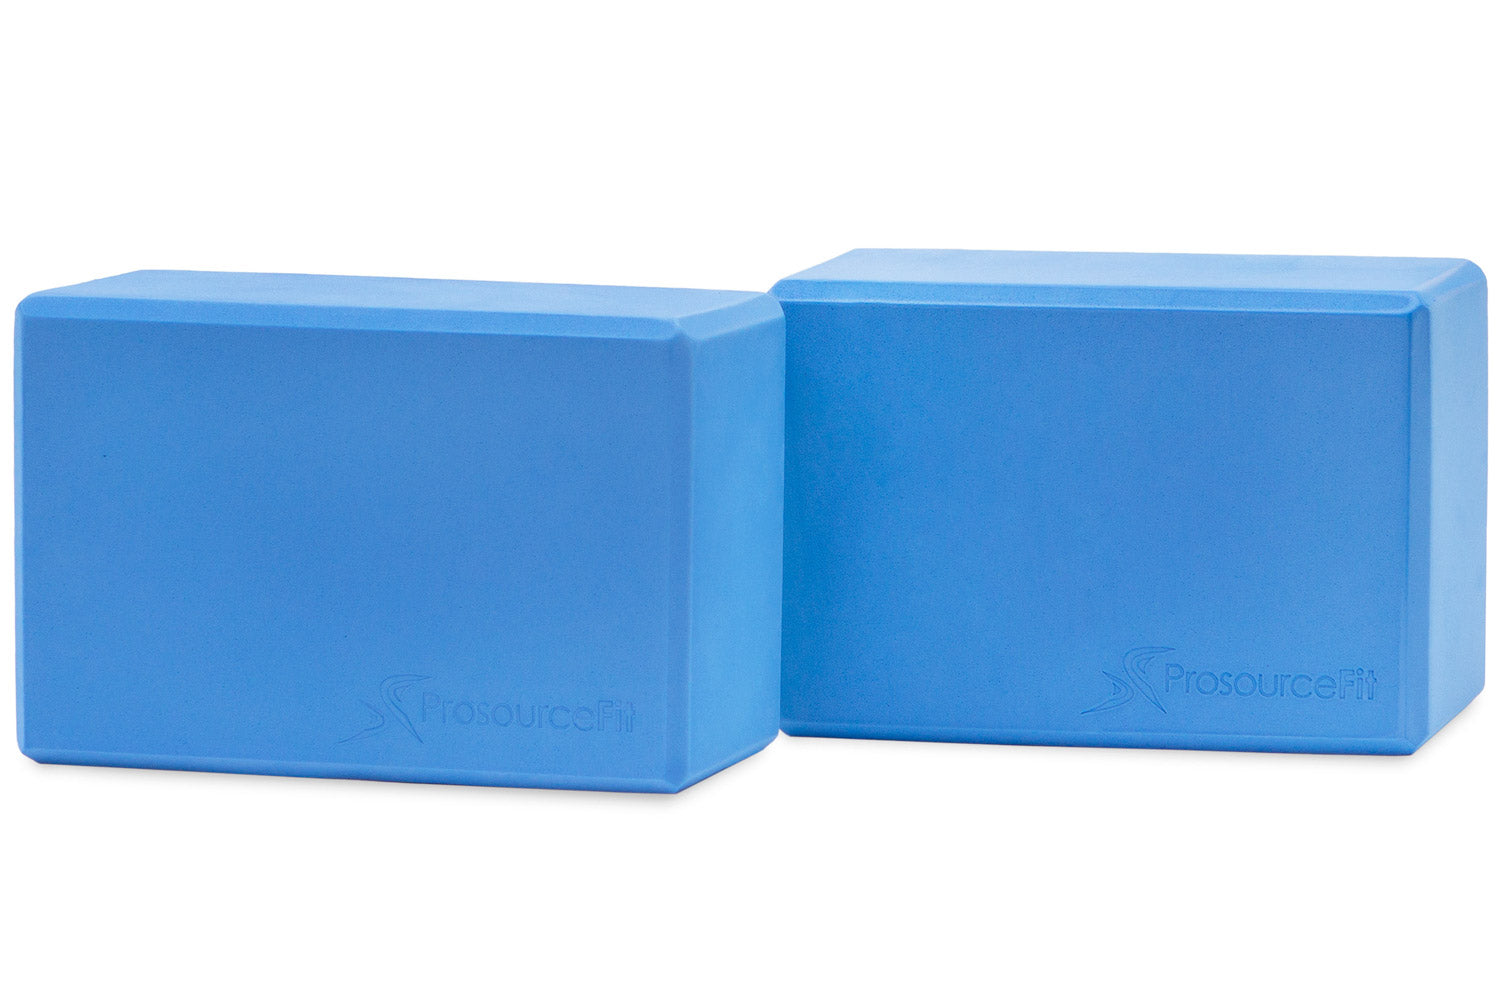 High Quality Foaming Foam Yoga Blocks Kmart For Home Exercise, Fitness, And  Health Gym Practice From Danny2014, $5.76